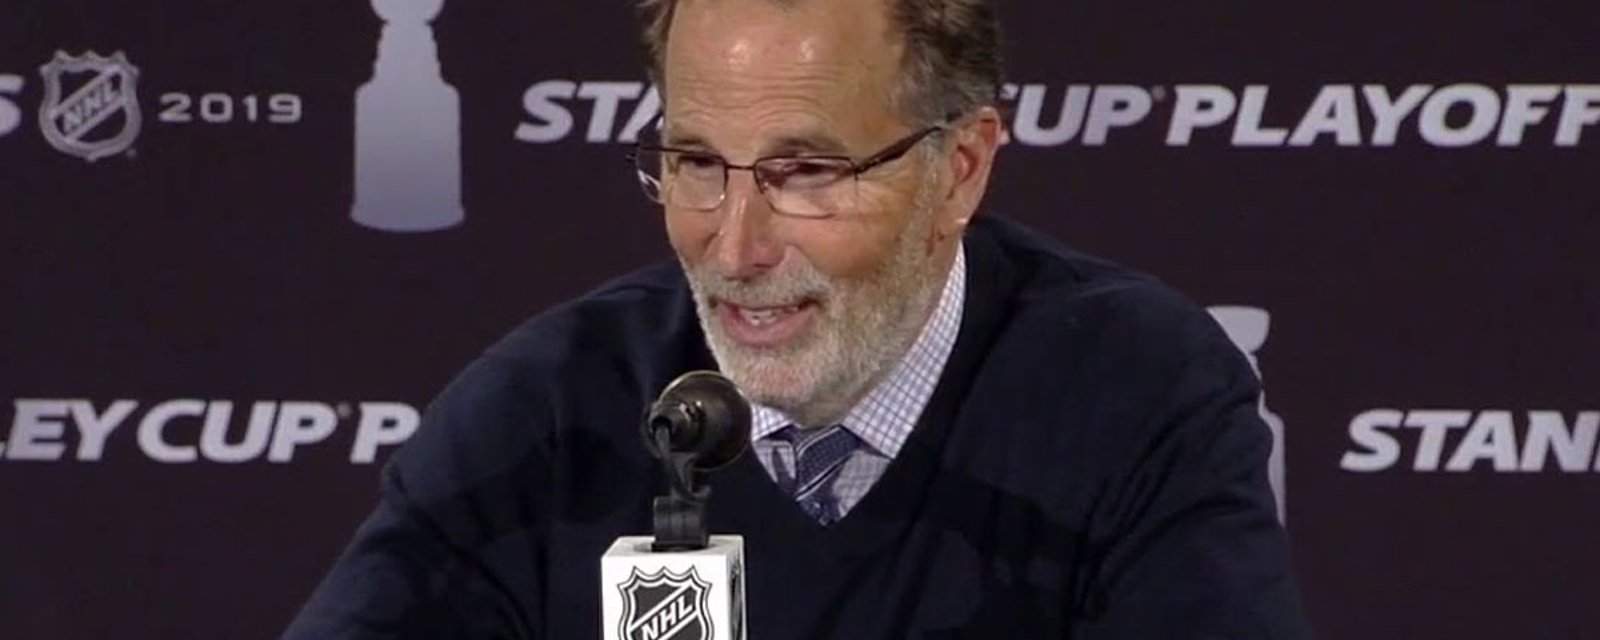 Torts shows up at his press conference reeking of beer!